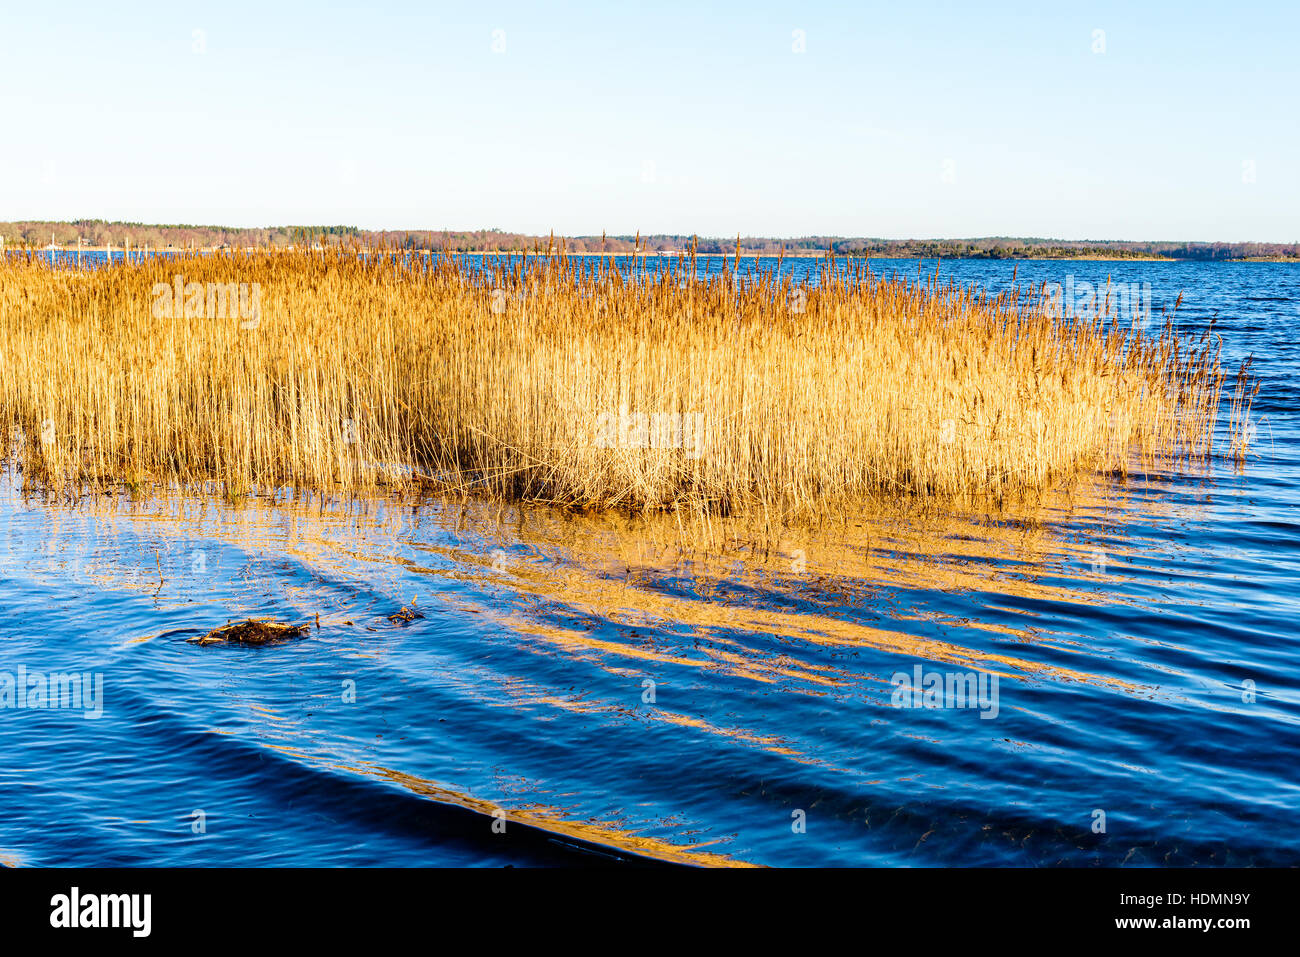 Dry and yellow reed bed in the sea in winter. Stock Photo